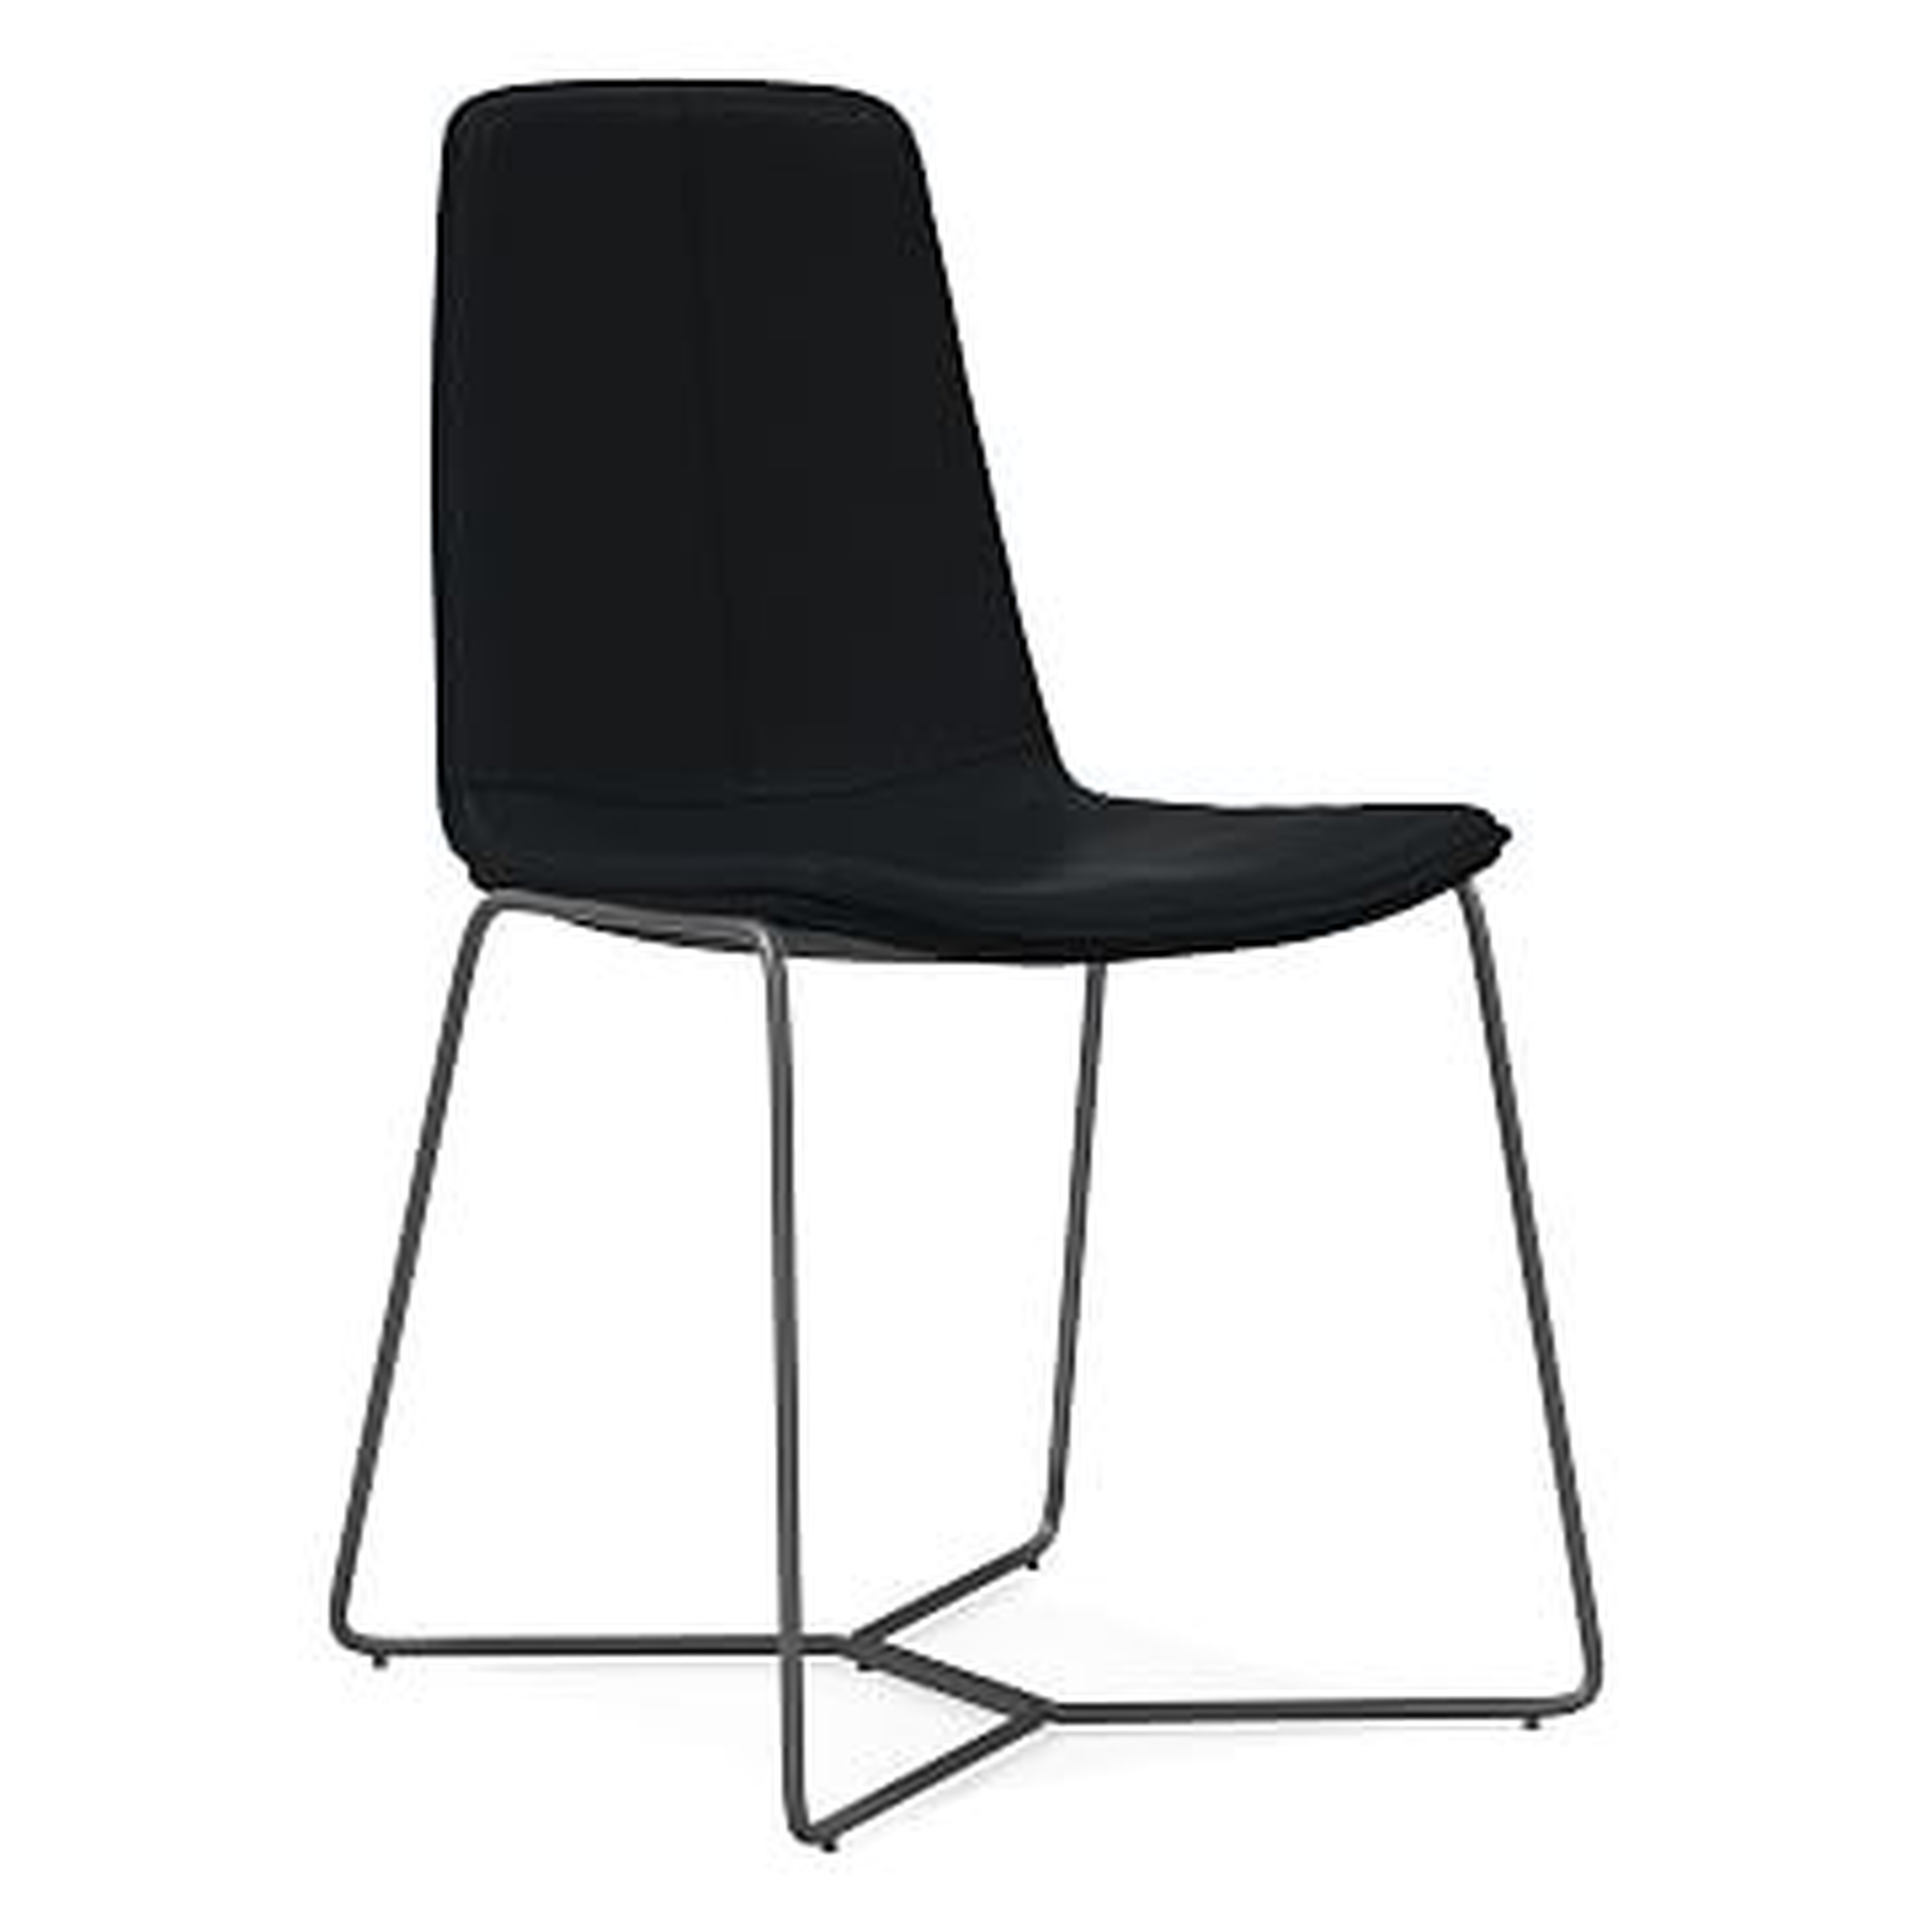 Slope Dining Chair, Sierra Leather, Black, Charcoal - West Elm